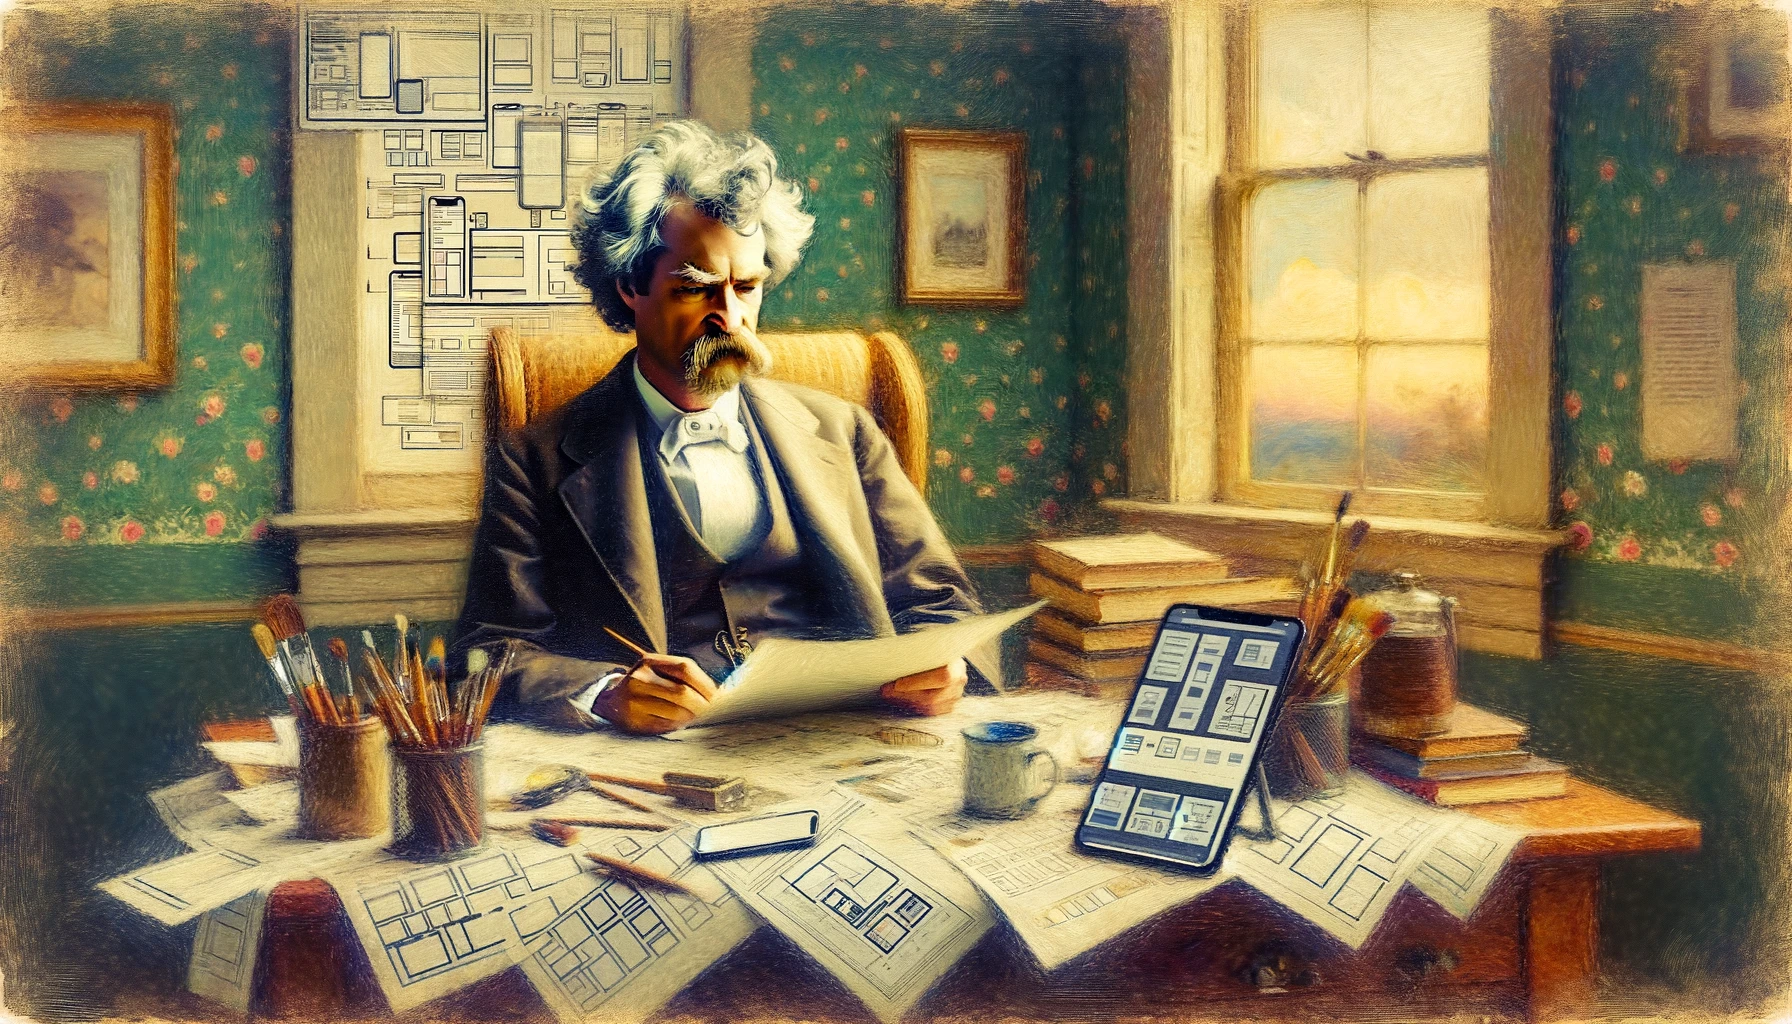 UI UX Quote - A painting in the impressionist style, depicting Mark Twain seated at a desk with UX design elements like wireframes, user interface sketches